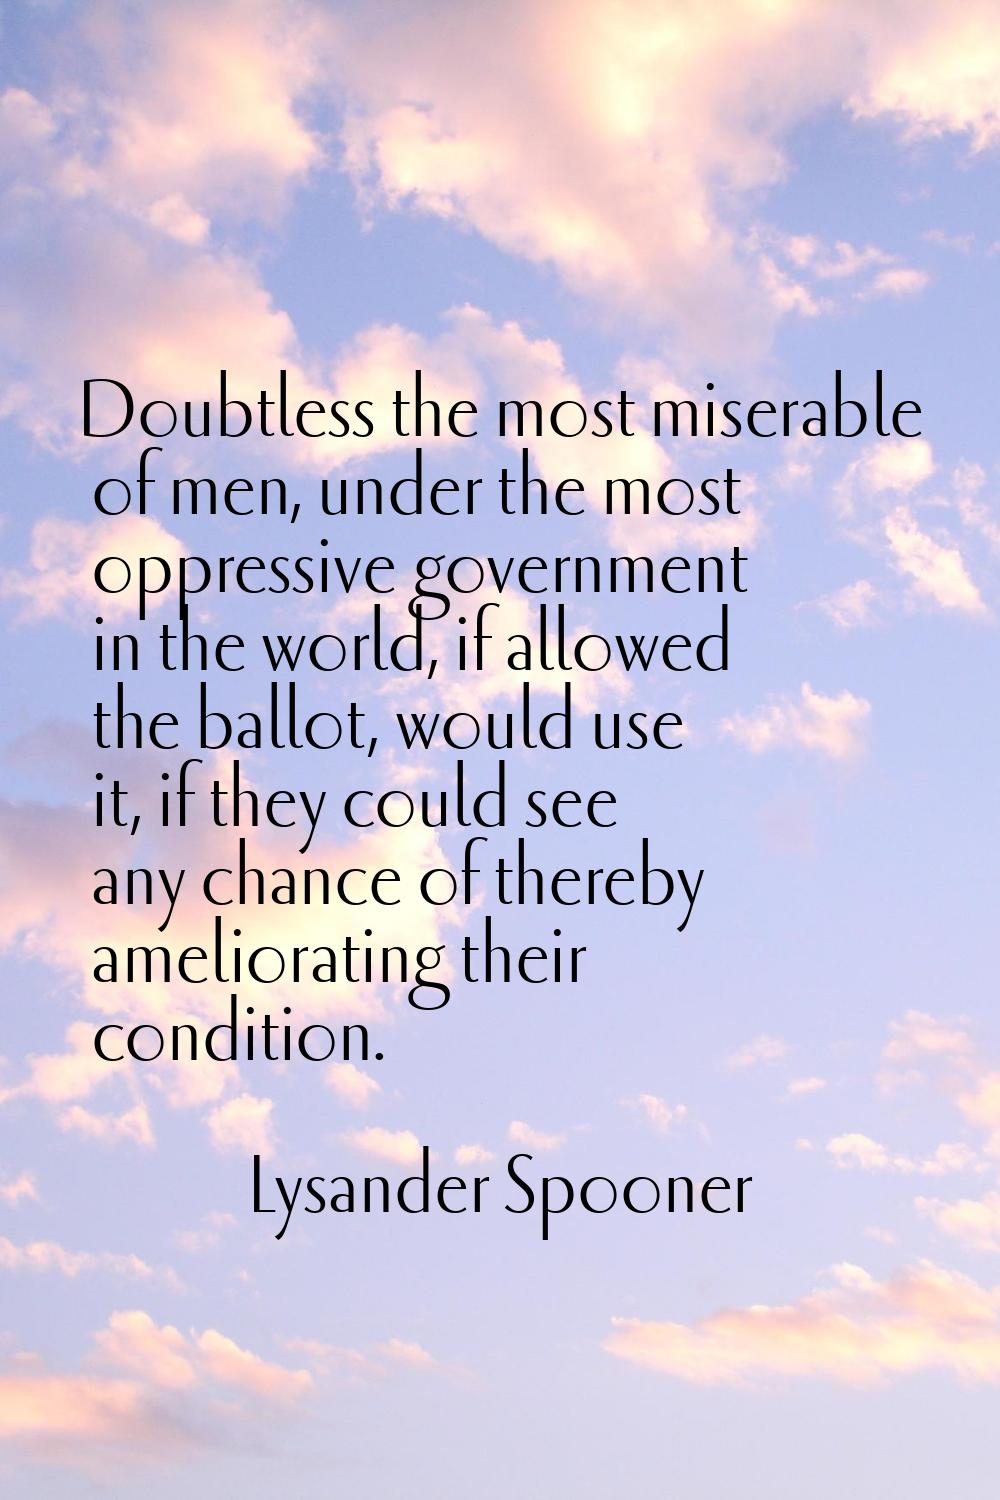 Doubtless the most miserable of men, under the most oppressive government in the world, if allowed 